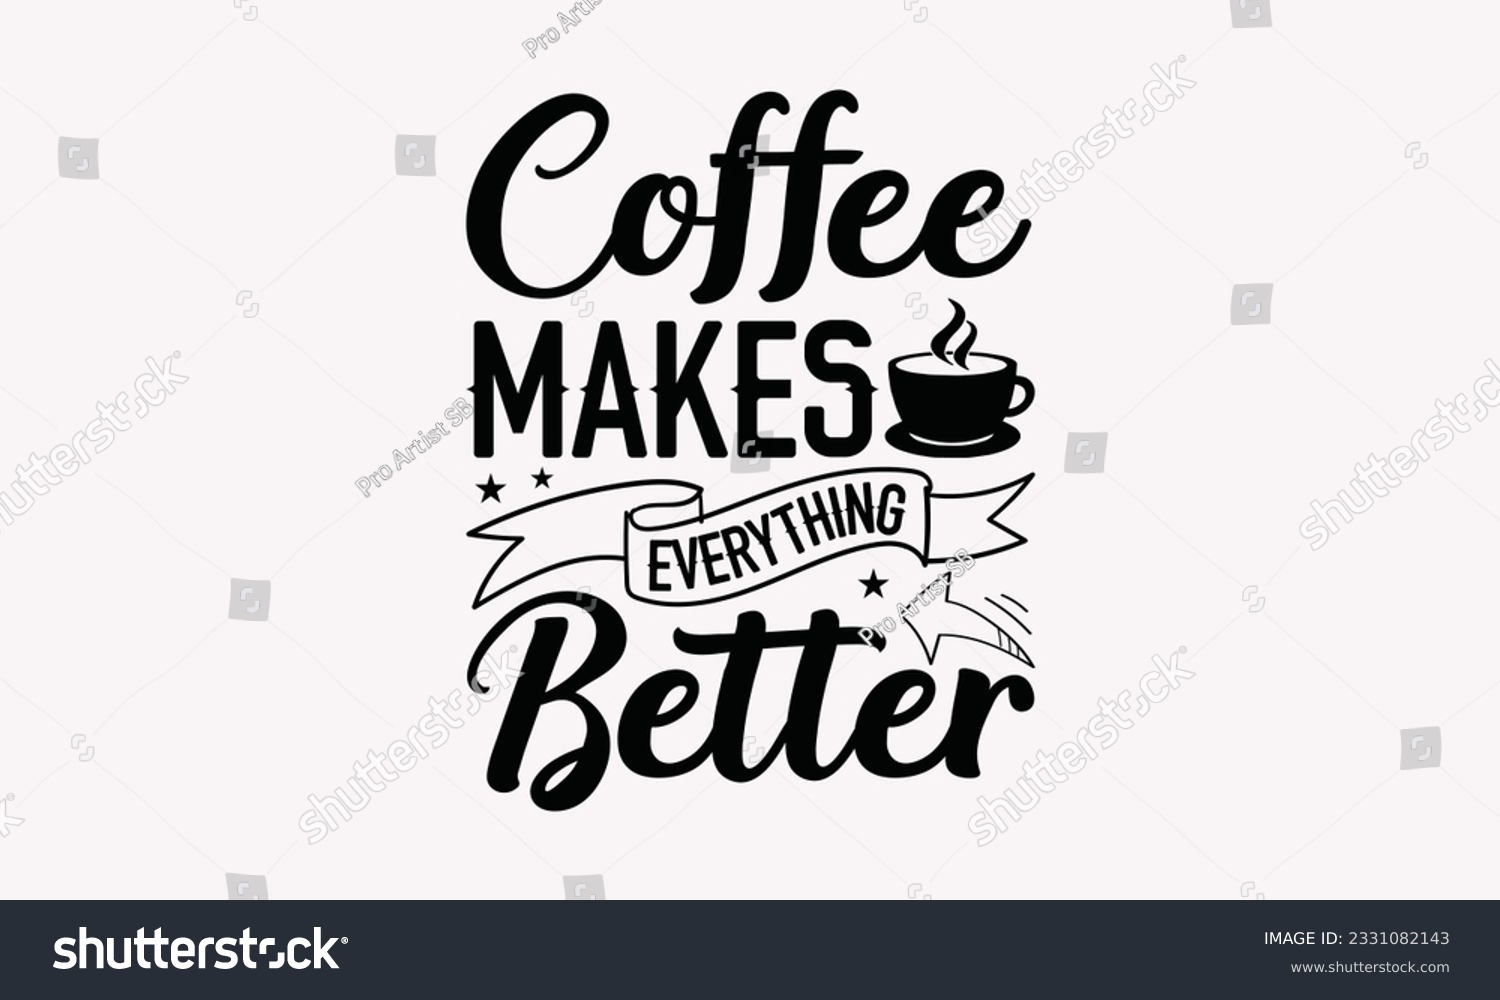 SVG of Coffee makes everything better - Coffee SVG Design Template, Cheer Quotes, Hand drawn lettering phrase, Isolated on white background. svg